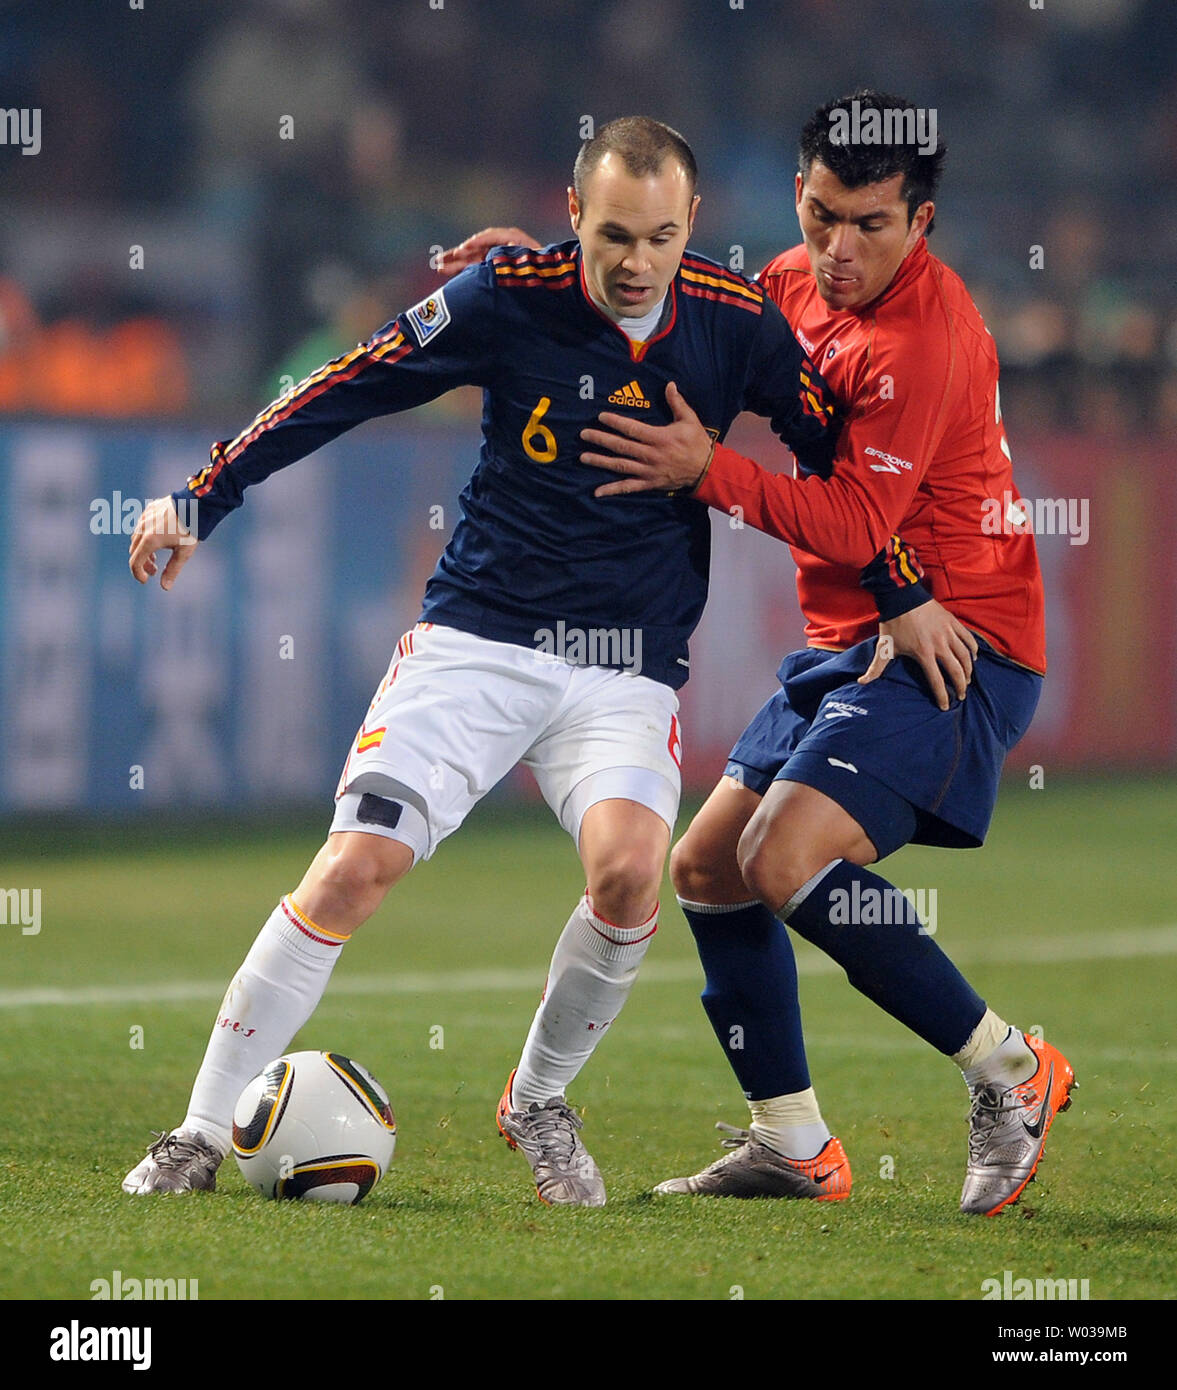 Gary Medel of Chile and Andres Iniesta of Spain chase the ball during the Group H match at the Loftus Versfeld Stadium in Pretoria, South Africa on June 25, 2010. UPI/Chris Brunskill Stock Photo